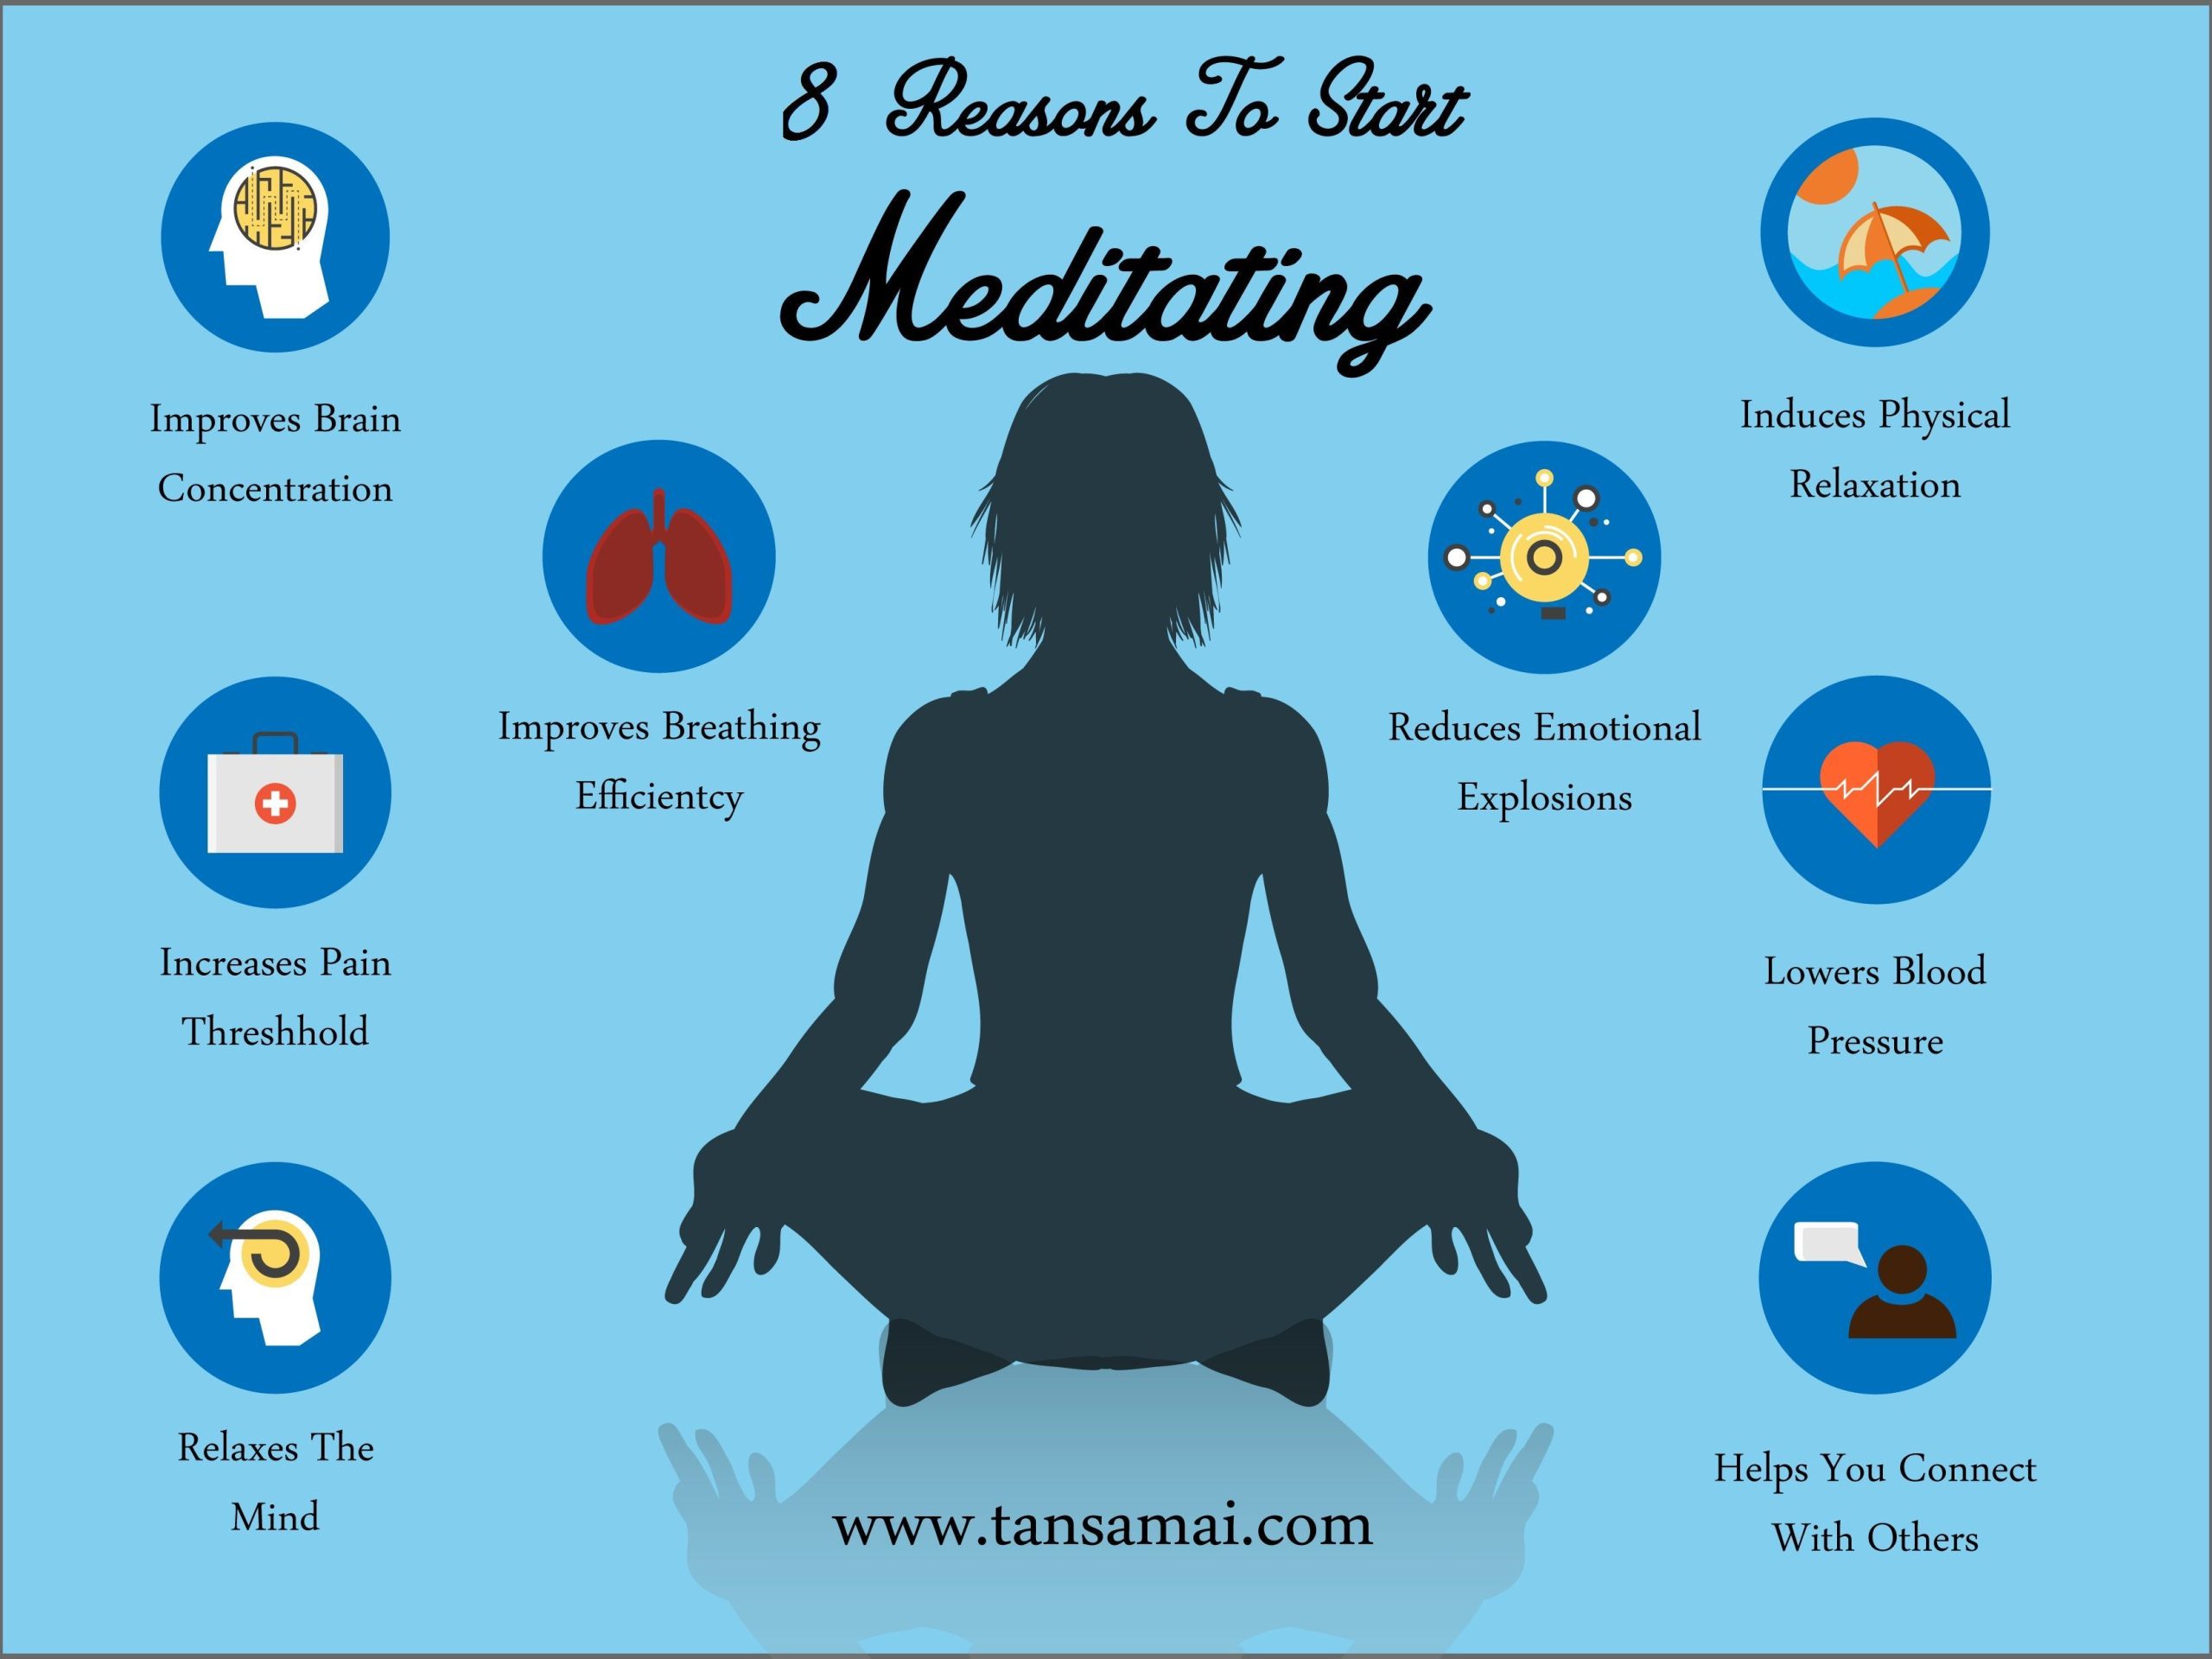 The Benefits of Mindfulness through Yoga and Meditation